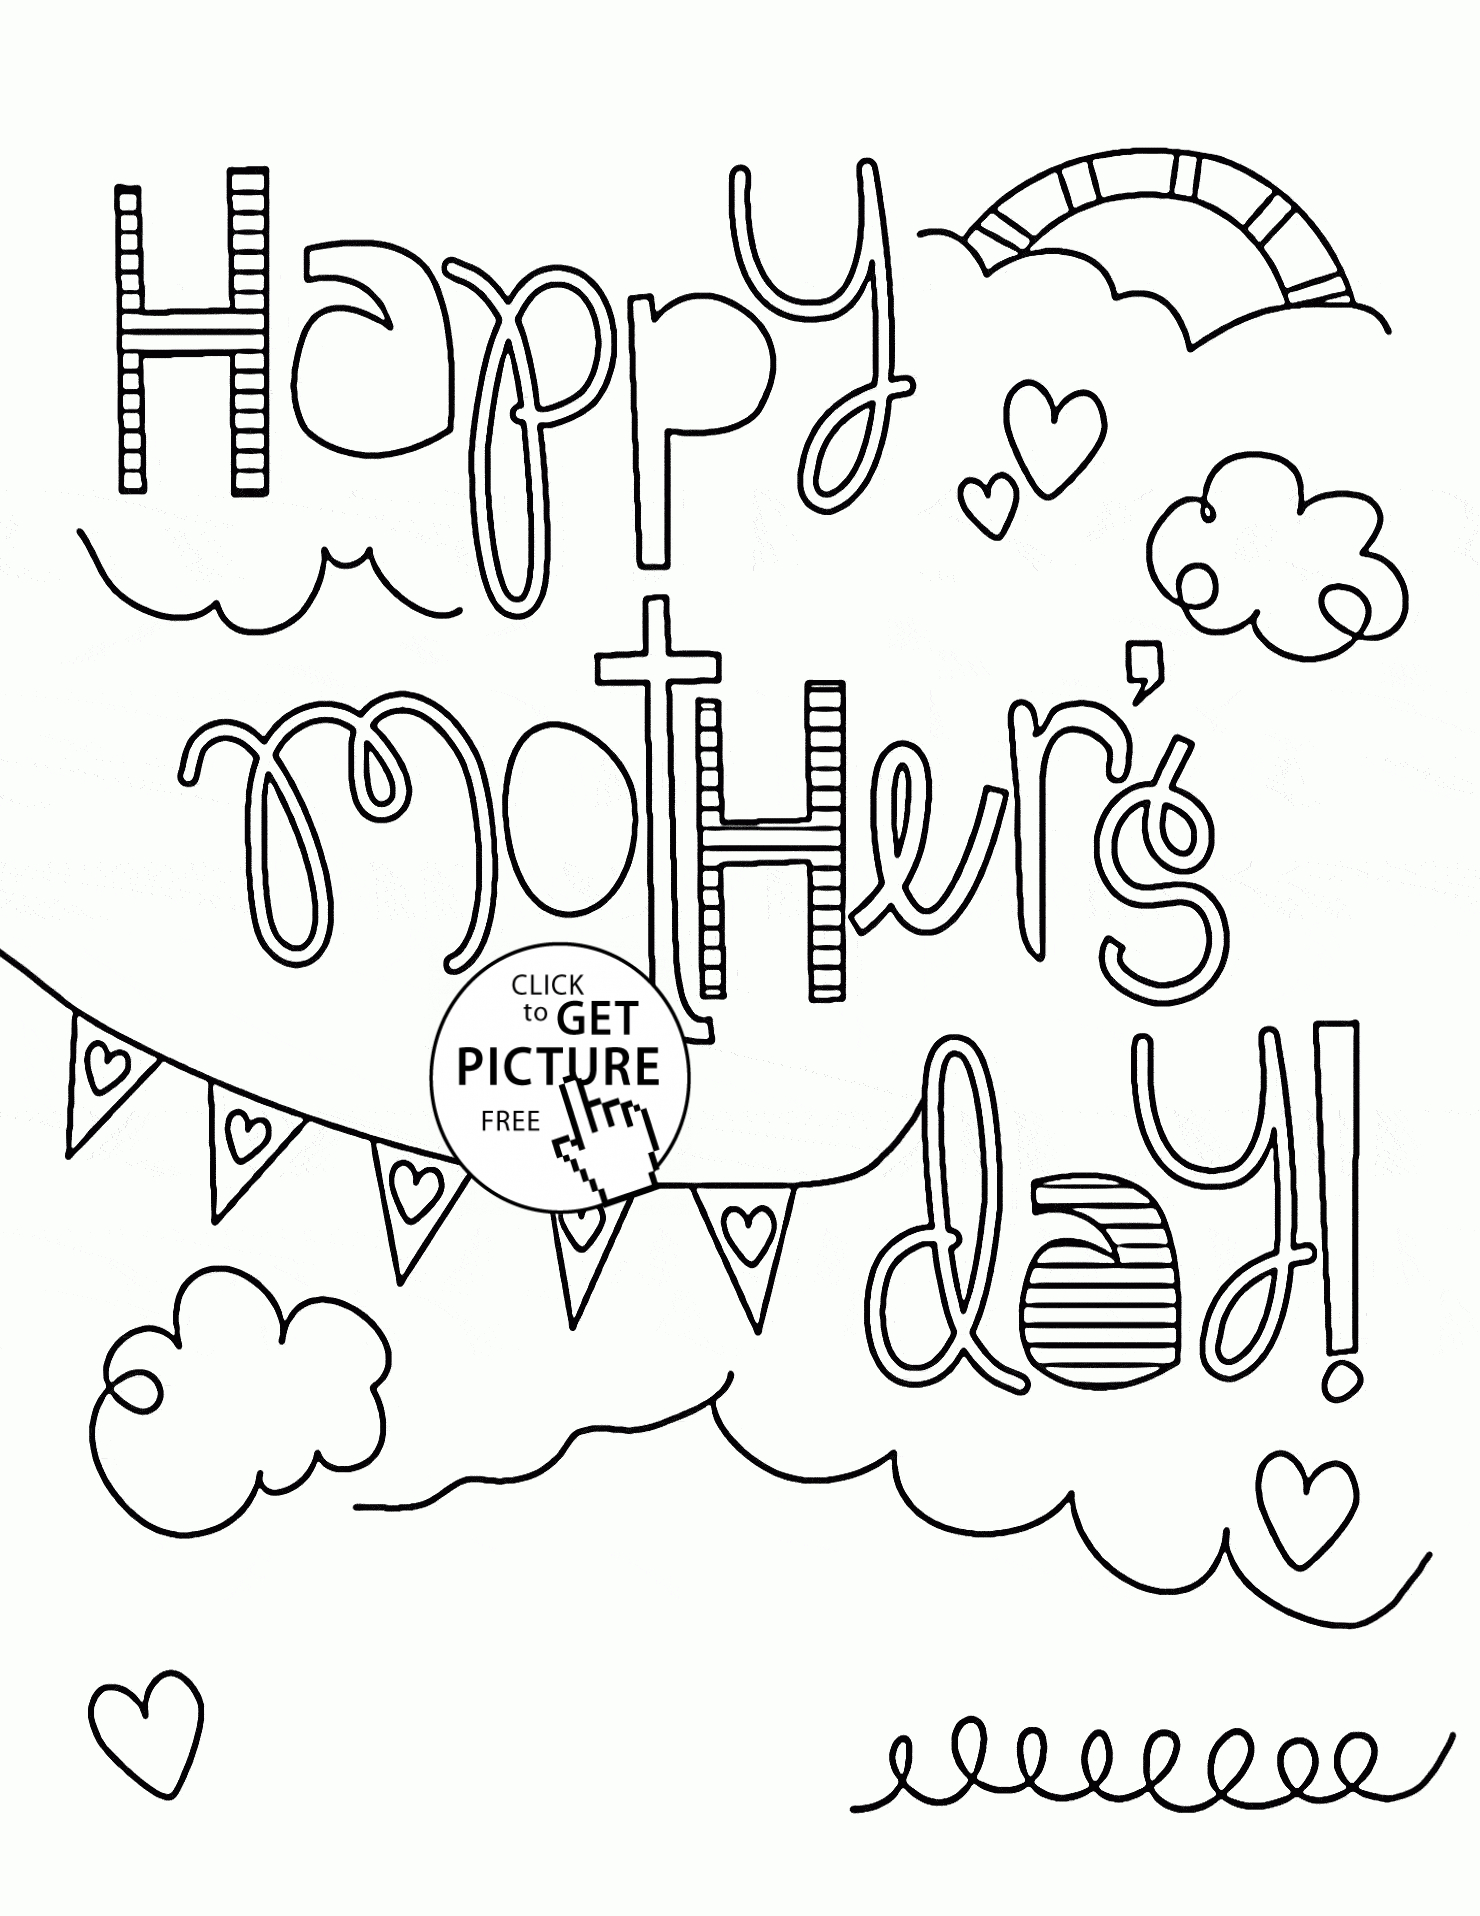 Free Mother's Day Coloring Pages Funny Mothers Day Coloring Page For Kids Coloring Pages Printables